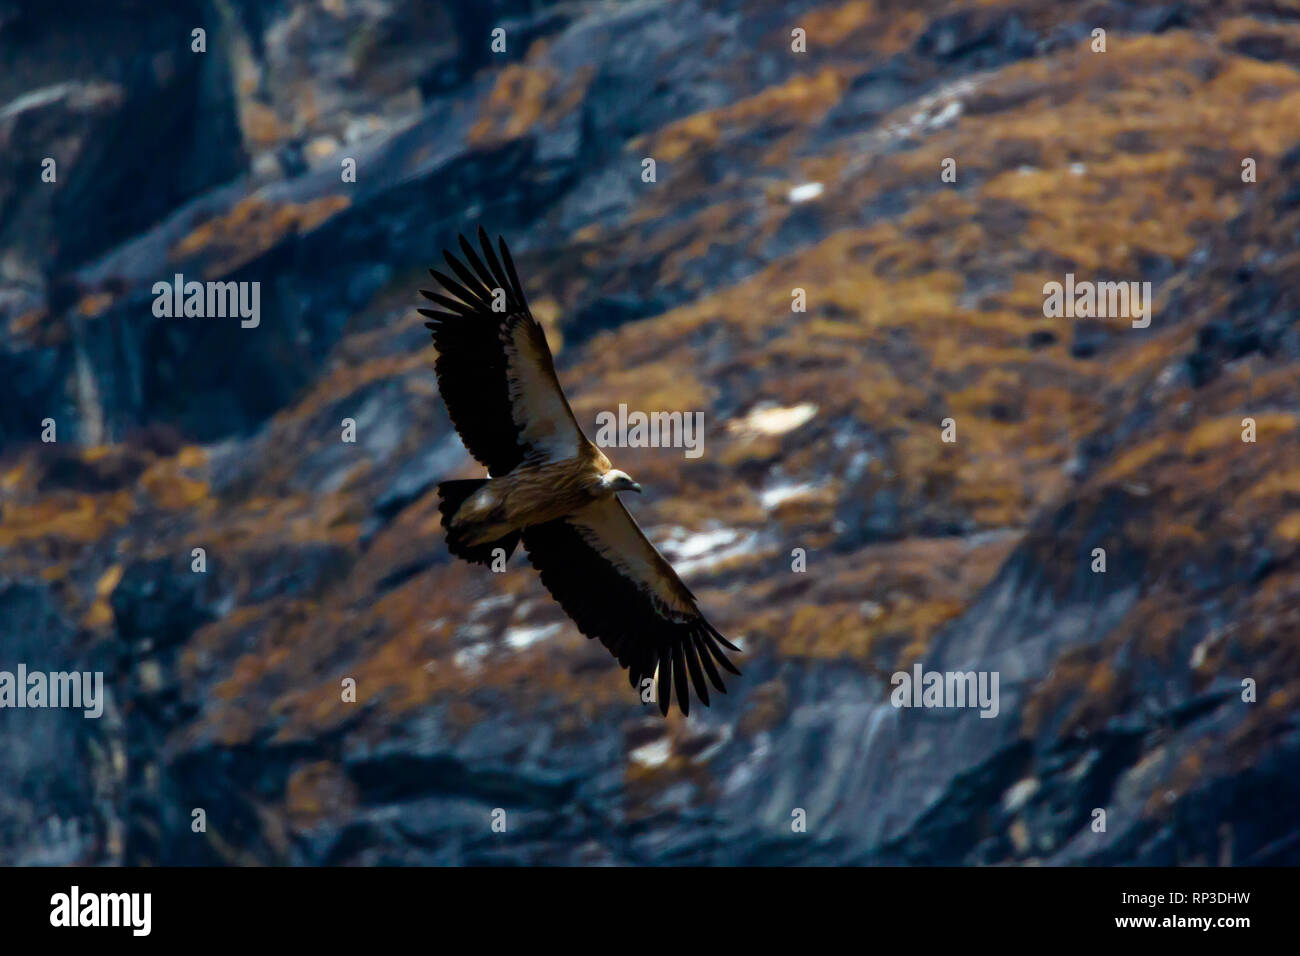 A golden eagle soars in the mountain regions of Nepal looking for prey, Phortse, Nepal Stock Photo